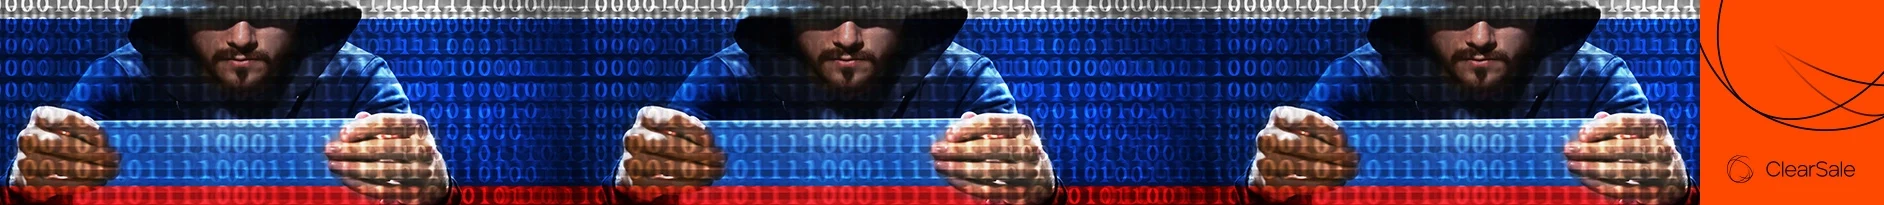 5-Ecommerce-Fraud-in-Russia